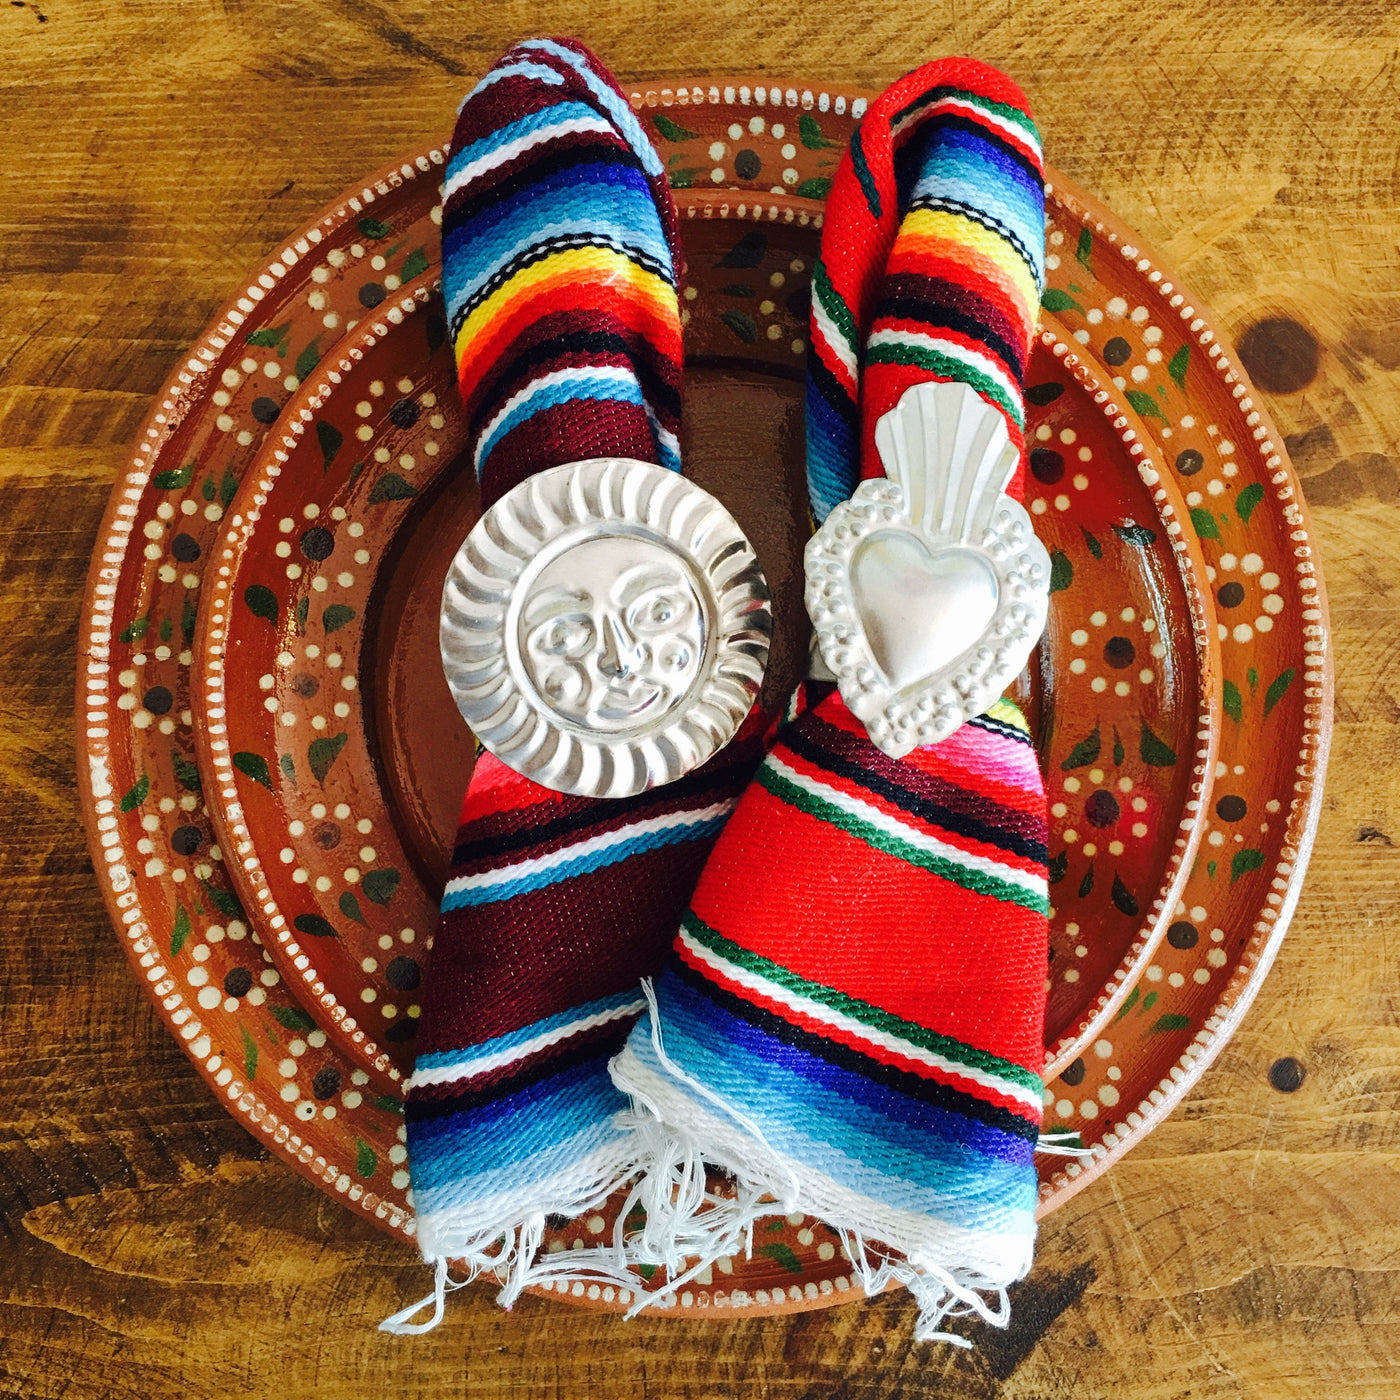 Tin napkin rings pictured with serape napkins on top of red floral clay plate. Napkin ring designs featured: el sol (sun) and sacred heart.  